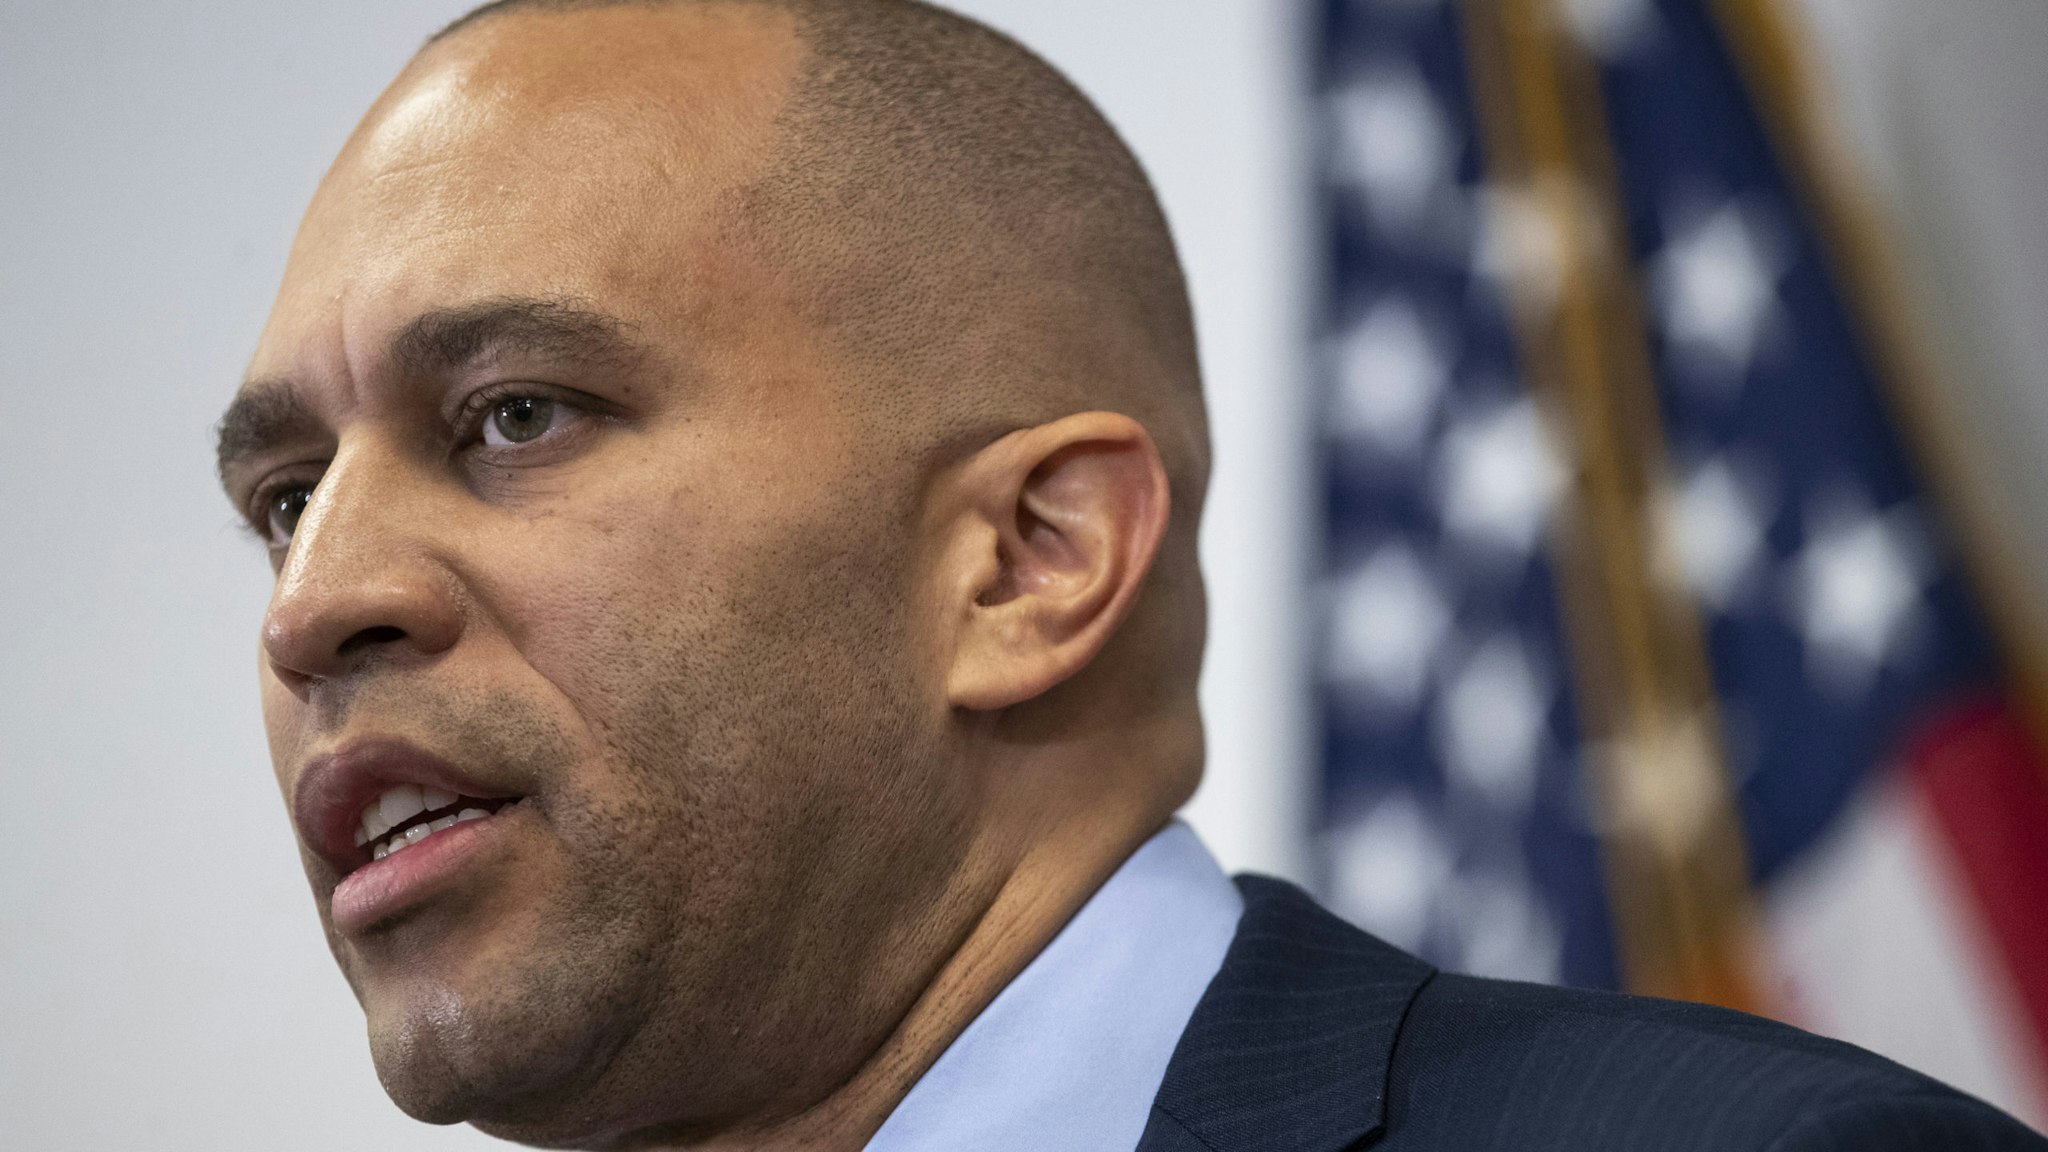 WASHINGTON, DC JANUARY 14: Chair of the House Democratic Caucus Rep. Hakeem Jeffries (D-NY) speaks during a press conference after a House Democratic Caucus meeting at the U.S. Capitol on January 14, 2020 in Washington, DC. Pelosi announced that the House will vote Wednesday on a resolution appointing House impeachment managers and will transmit the articles of impeachment to the Senate, allowing the trial of President Trump to begin.